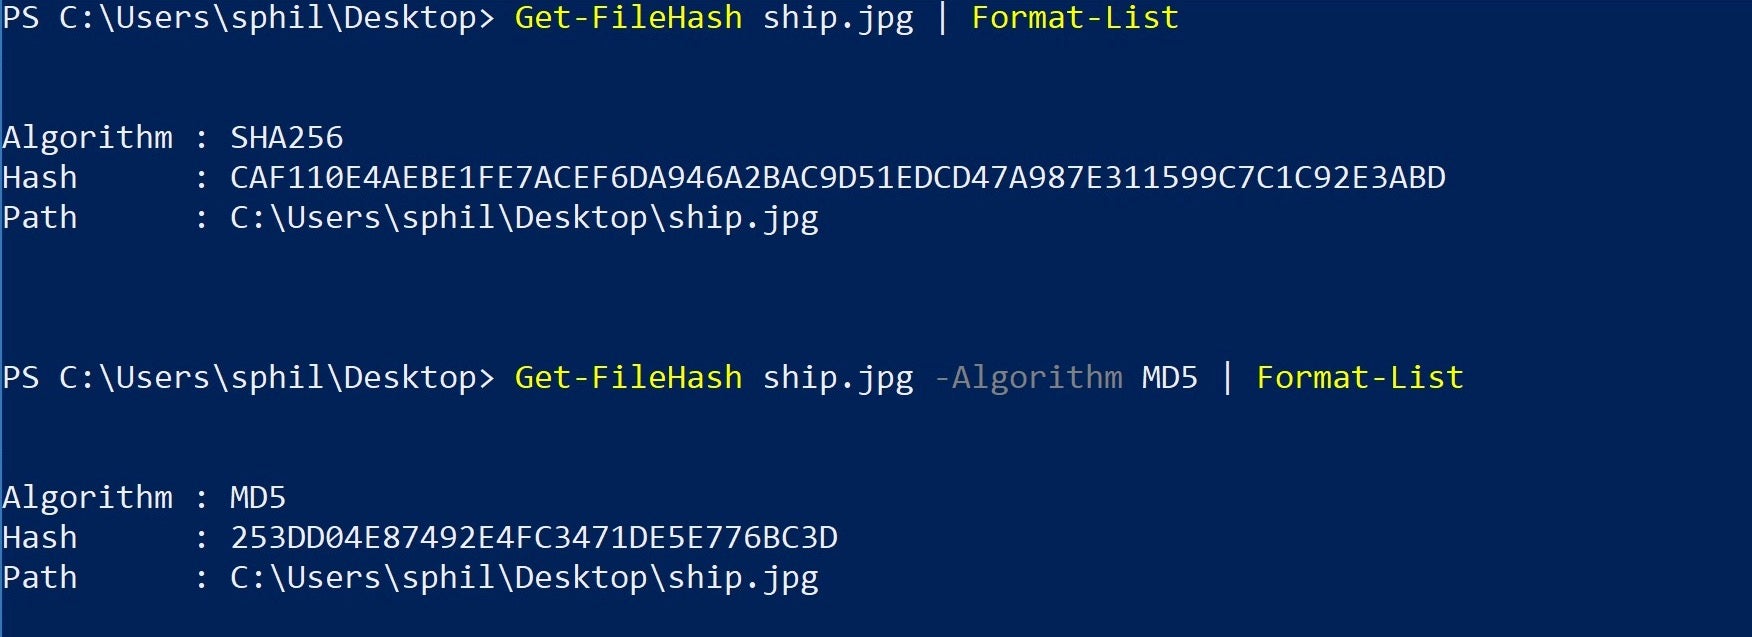 image of powershell formatted hash values